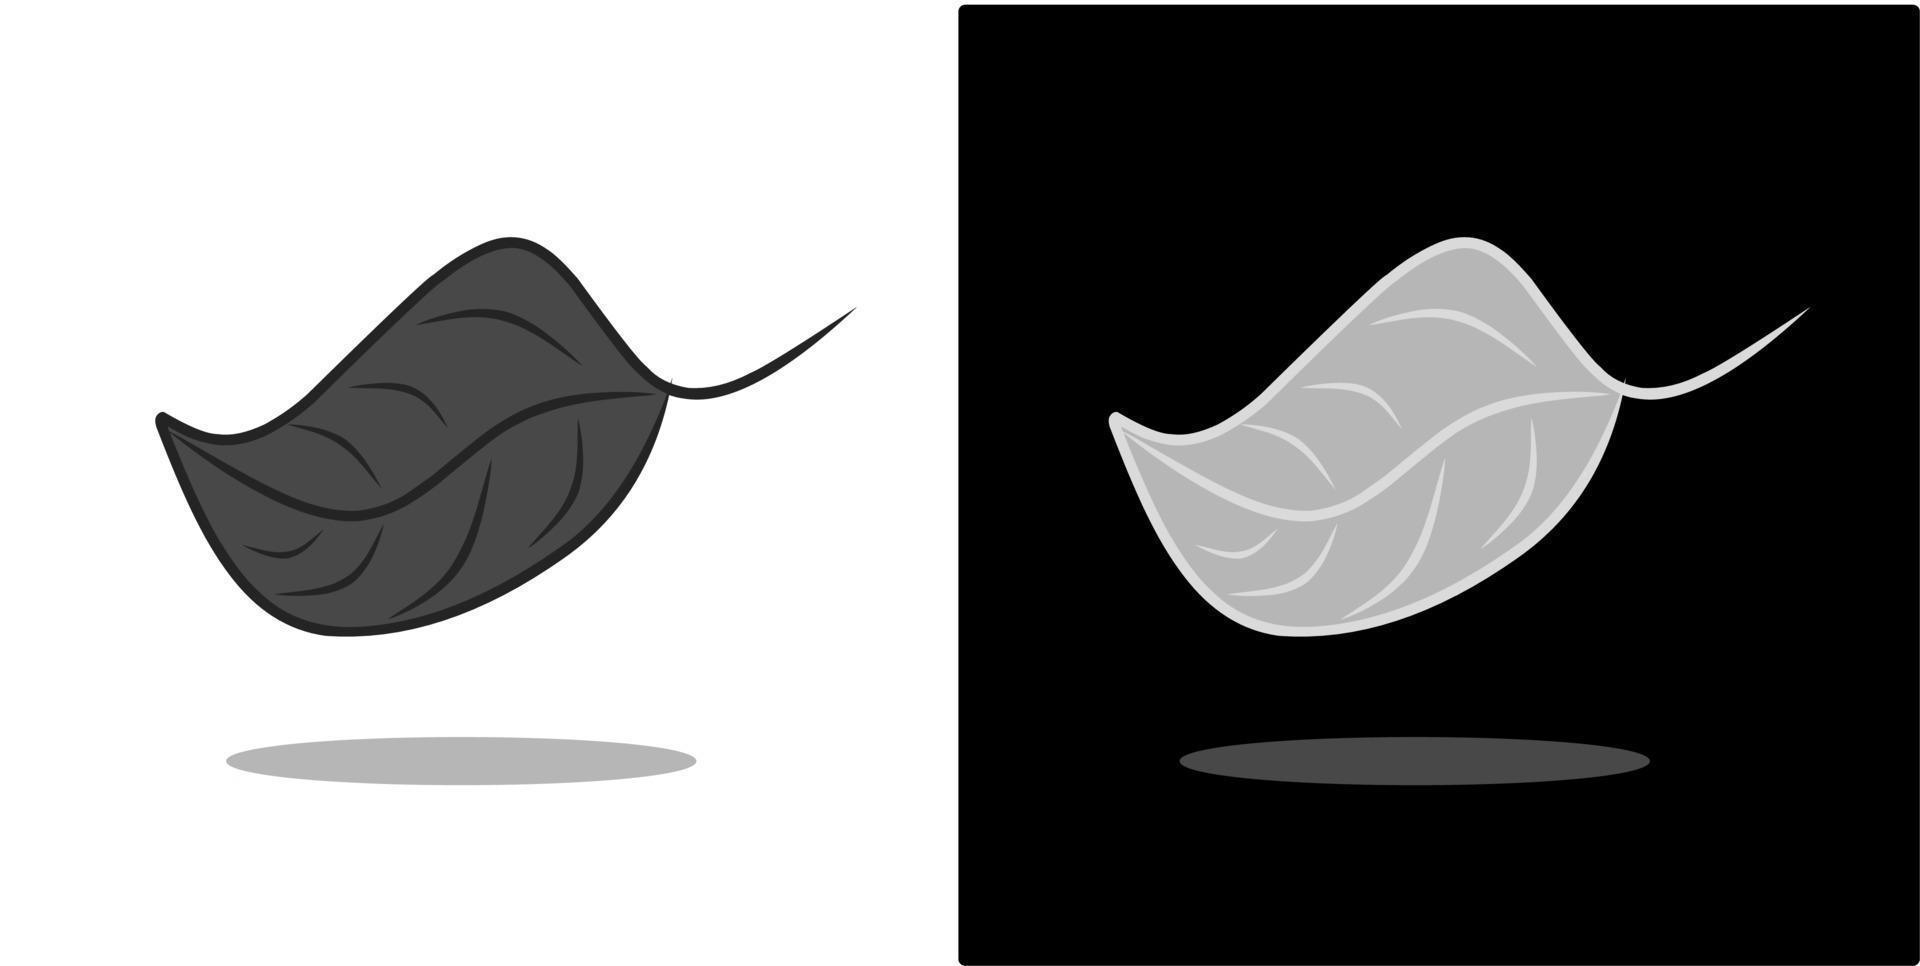 vector illustration of a leaf, isolated on a black and white background design